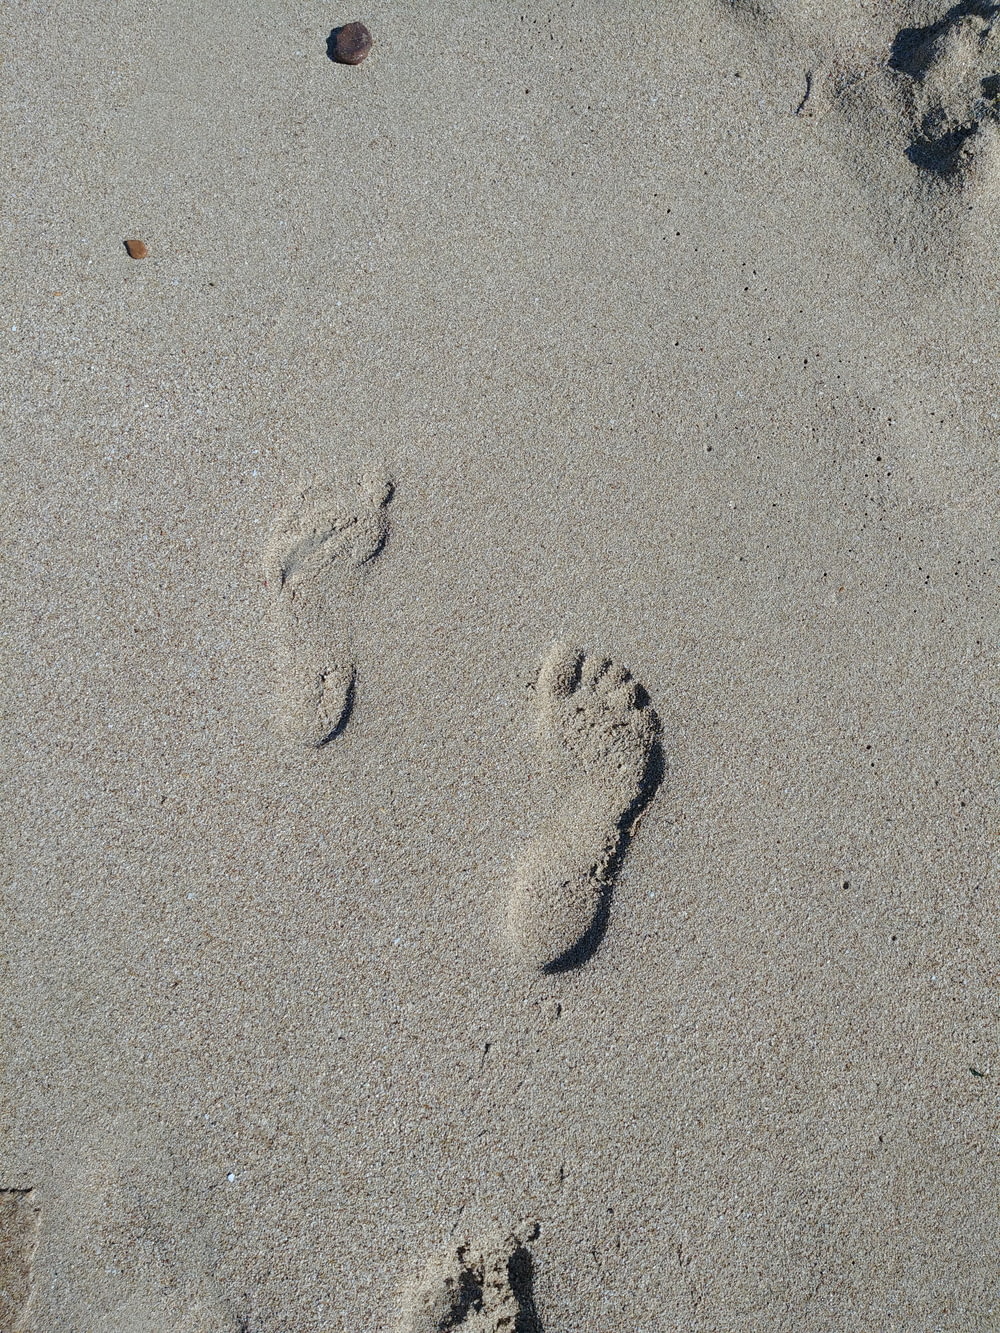 a pair of footprints in the sand on a beach